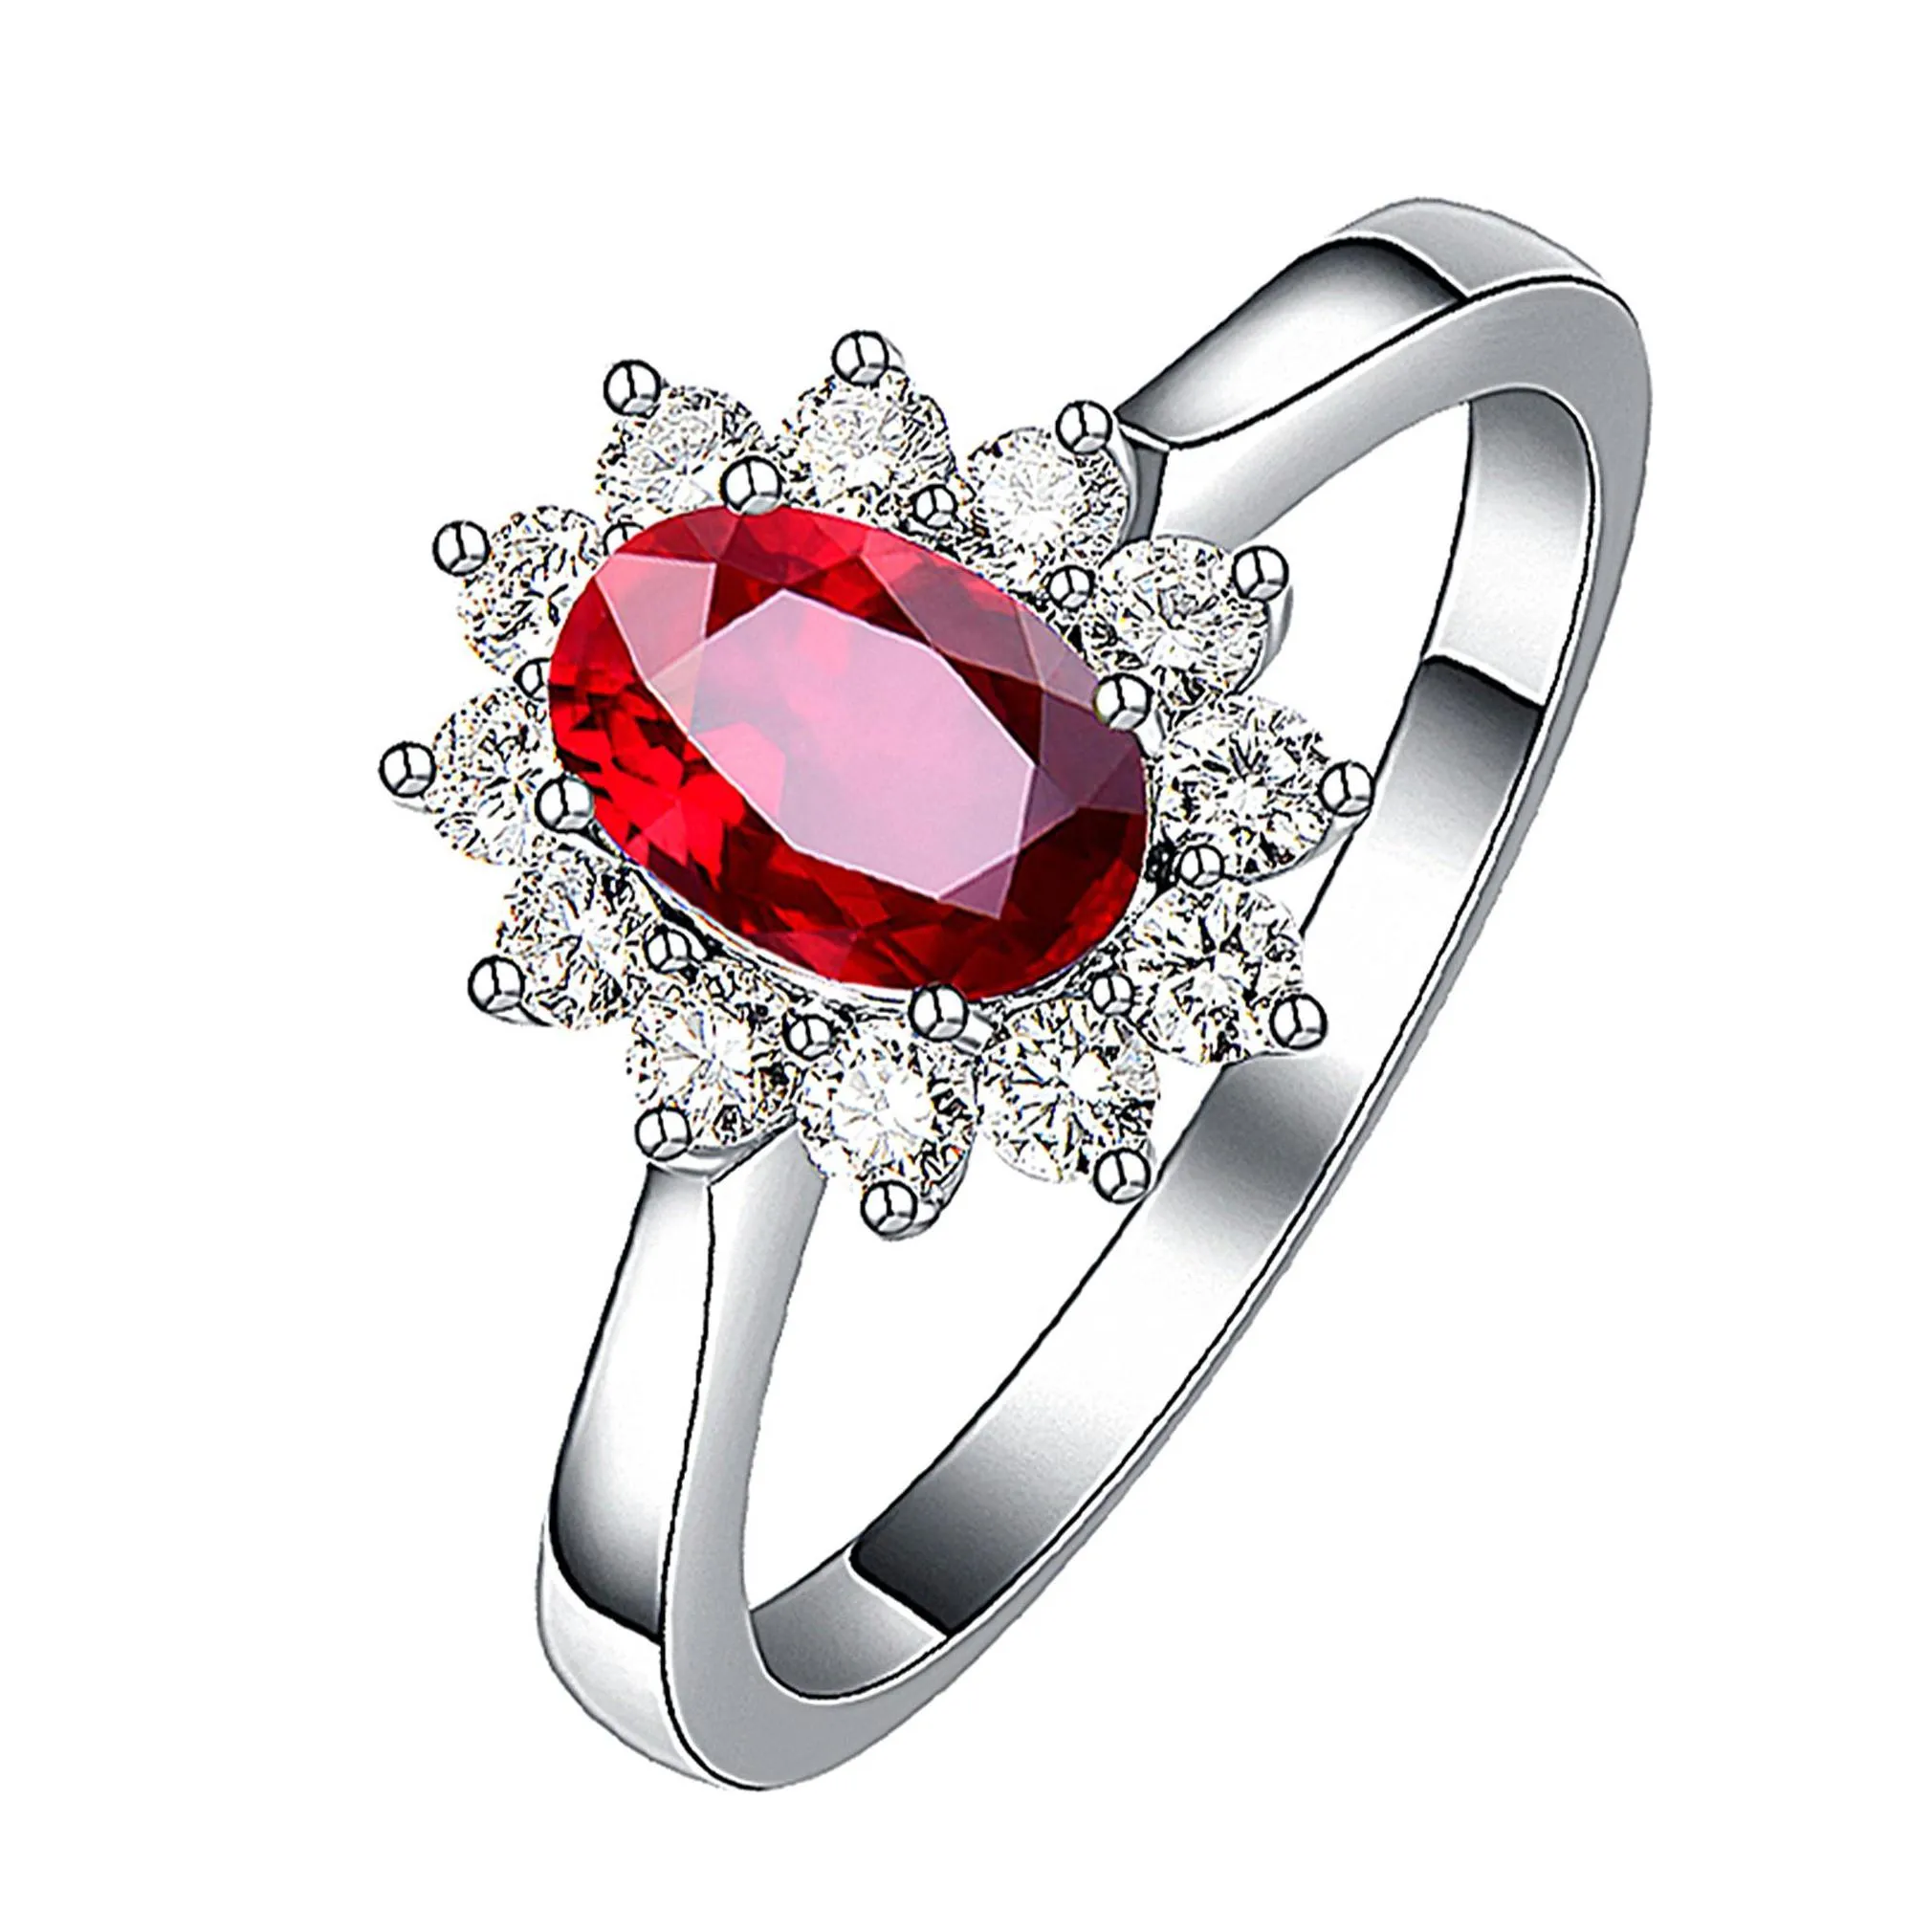 Solitaire Ring 925 Sterling Sier Timeless Elegance Crown Red Tilted Heart for Women Jewelry Nanashop Drop Drull Dress